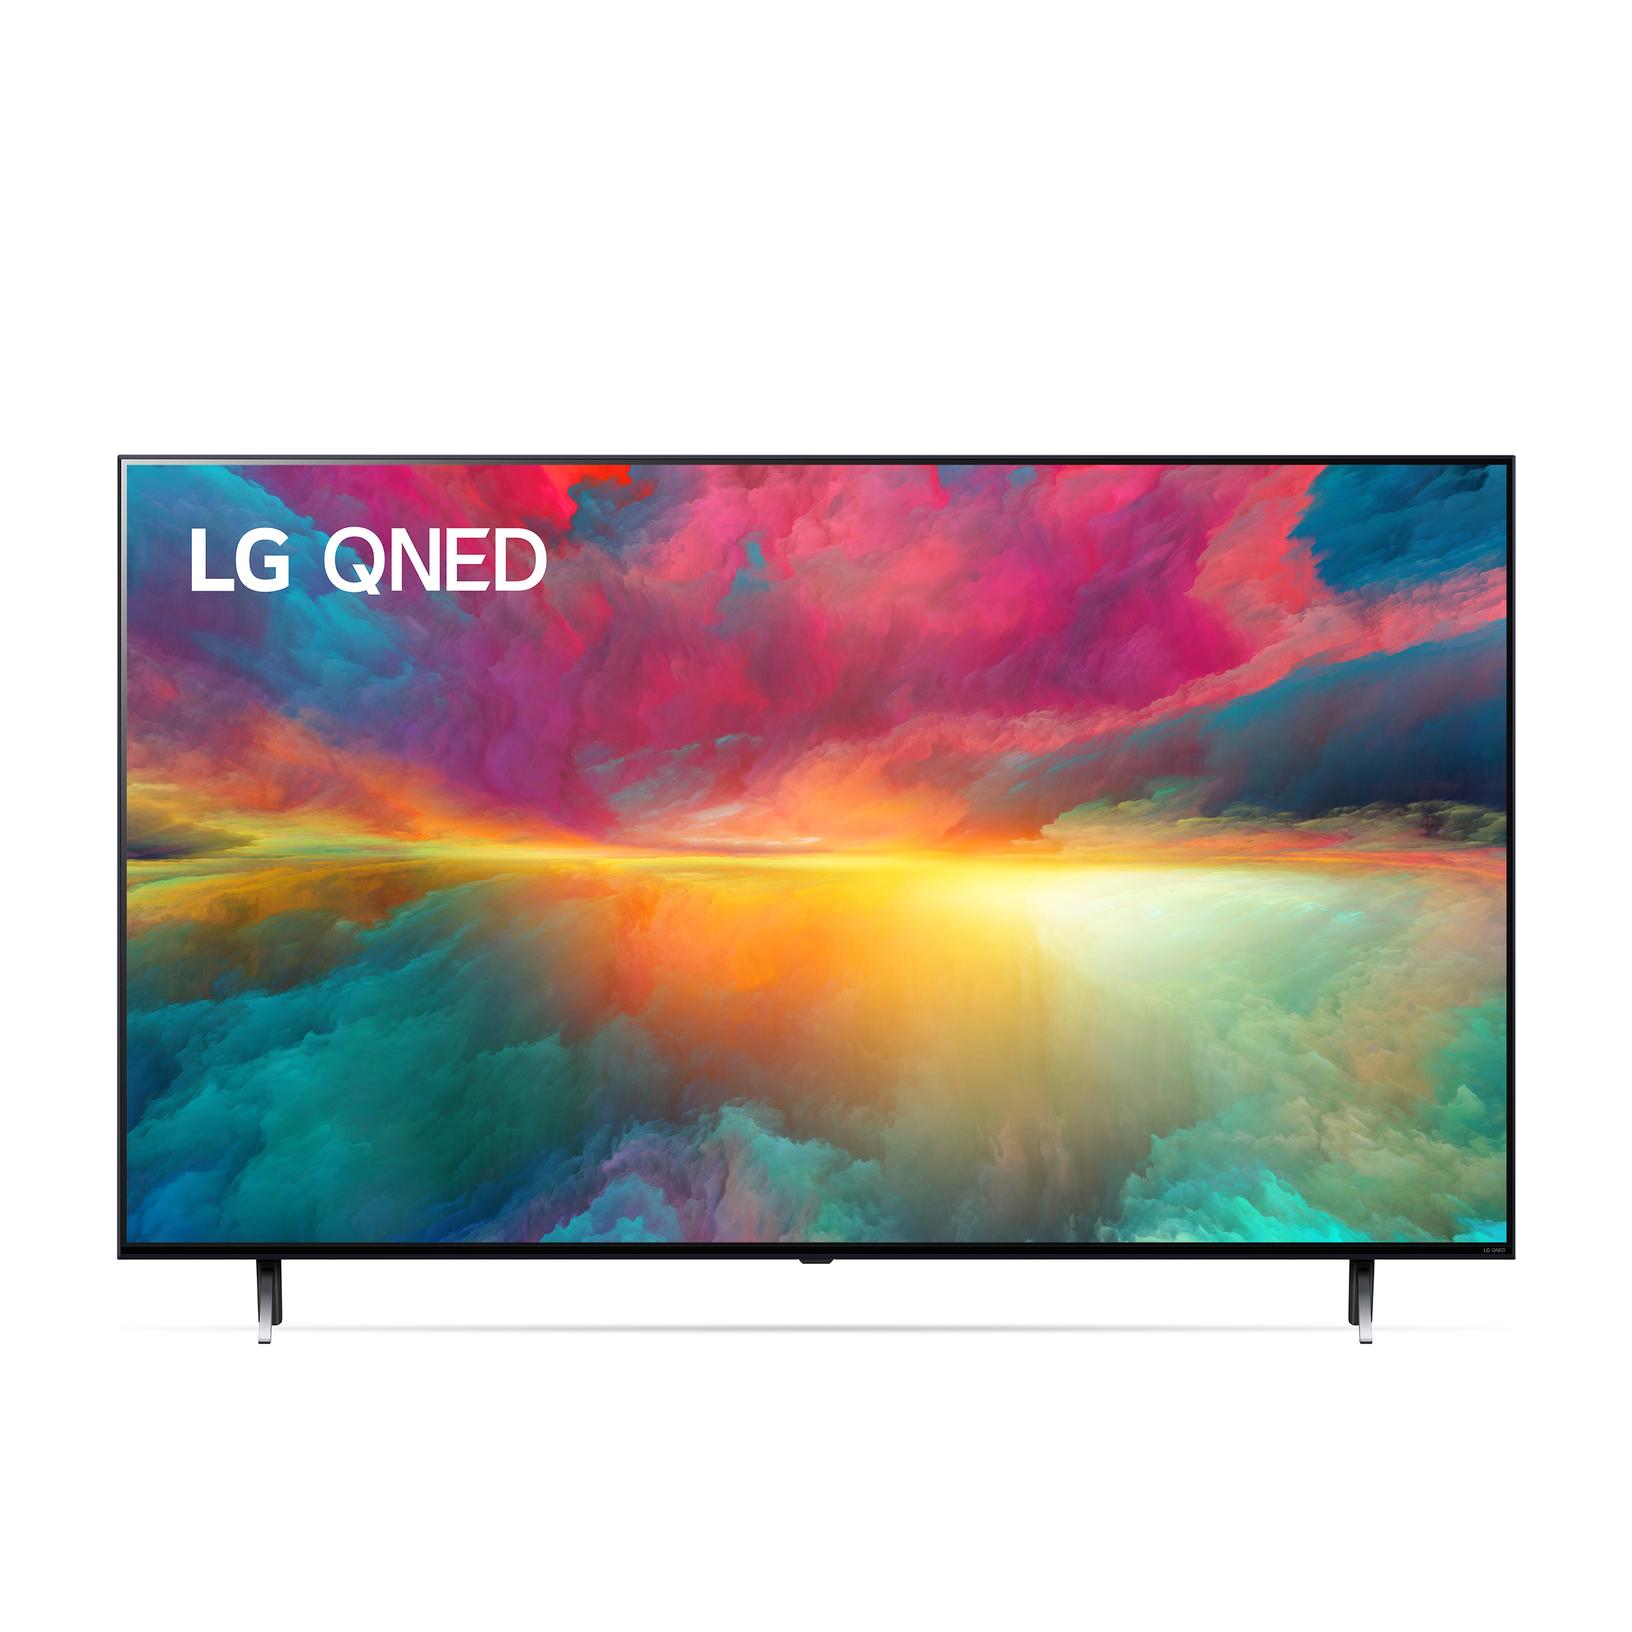 Offerta per LG - QNED 55'' Serie QNED75 55QNED756RA, TV 4K, 4 HDMI, SMART TV 2023 a 649€ in Expert